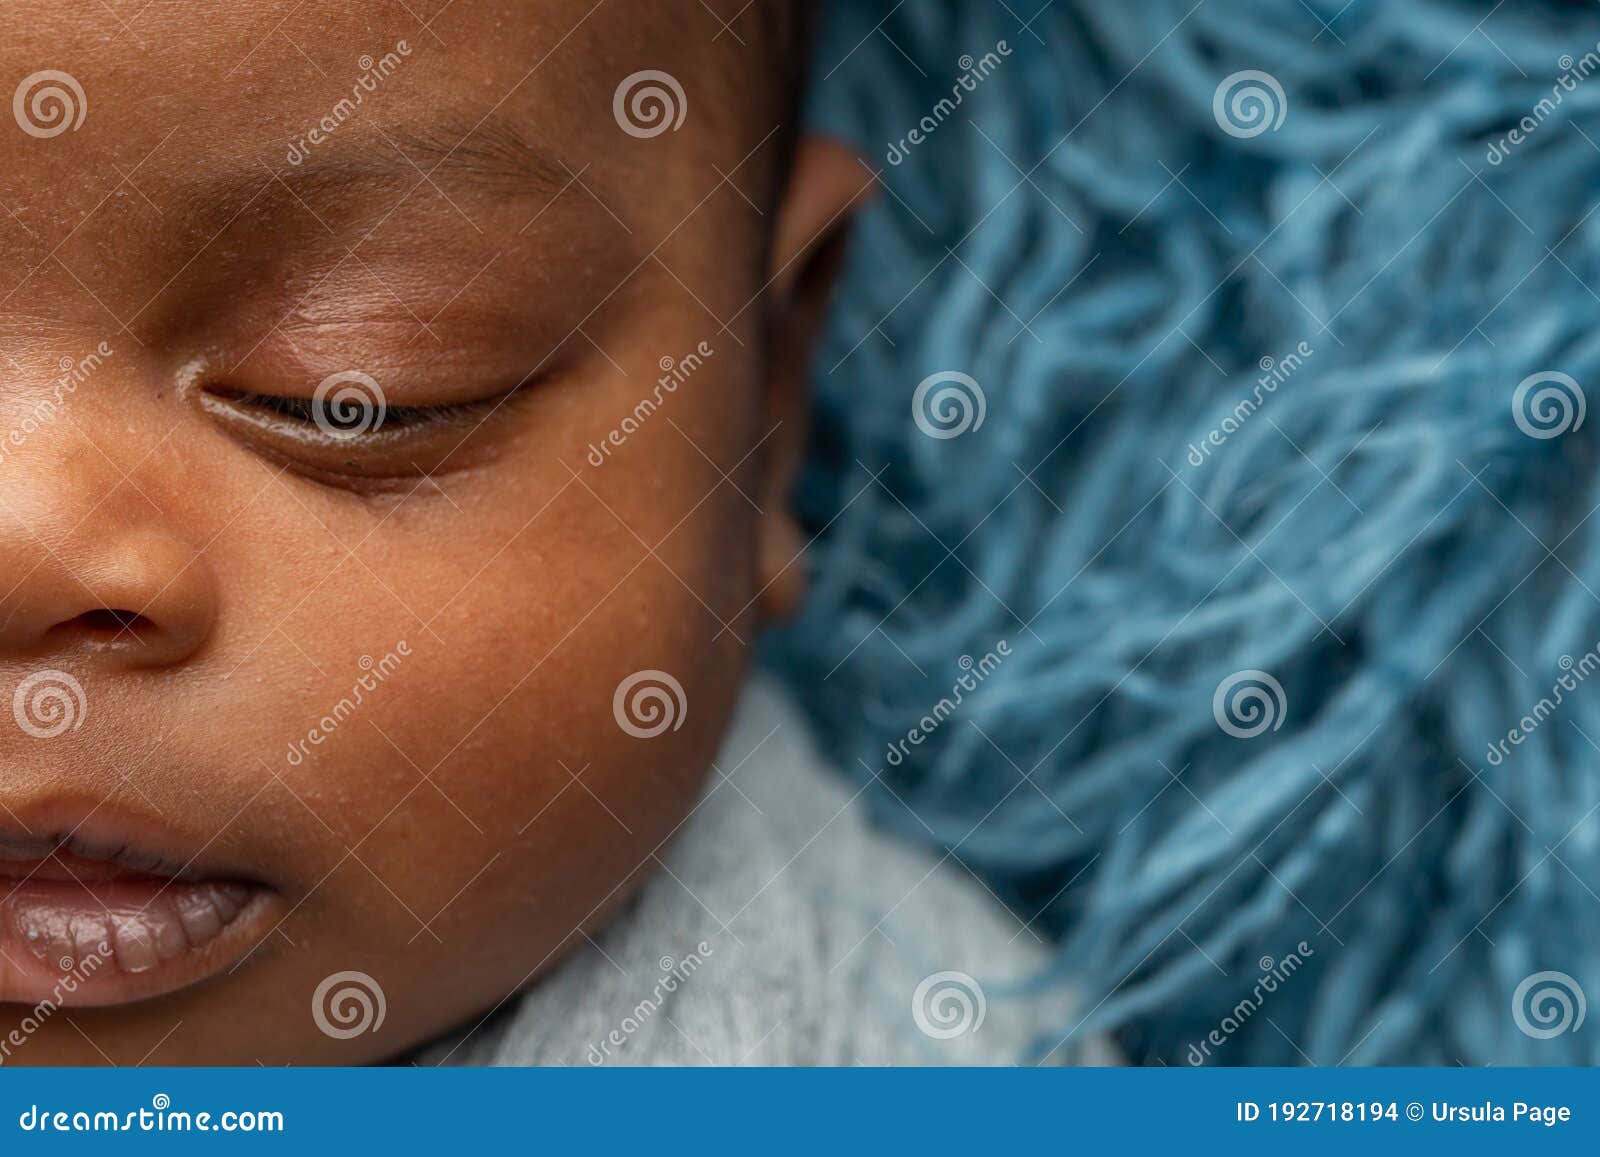 african american babies with blue eyes